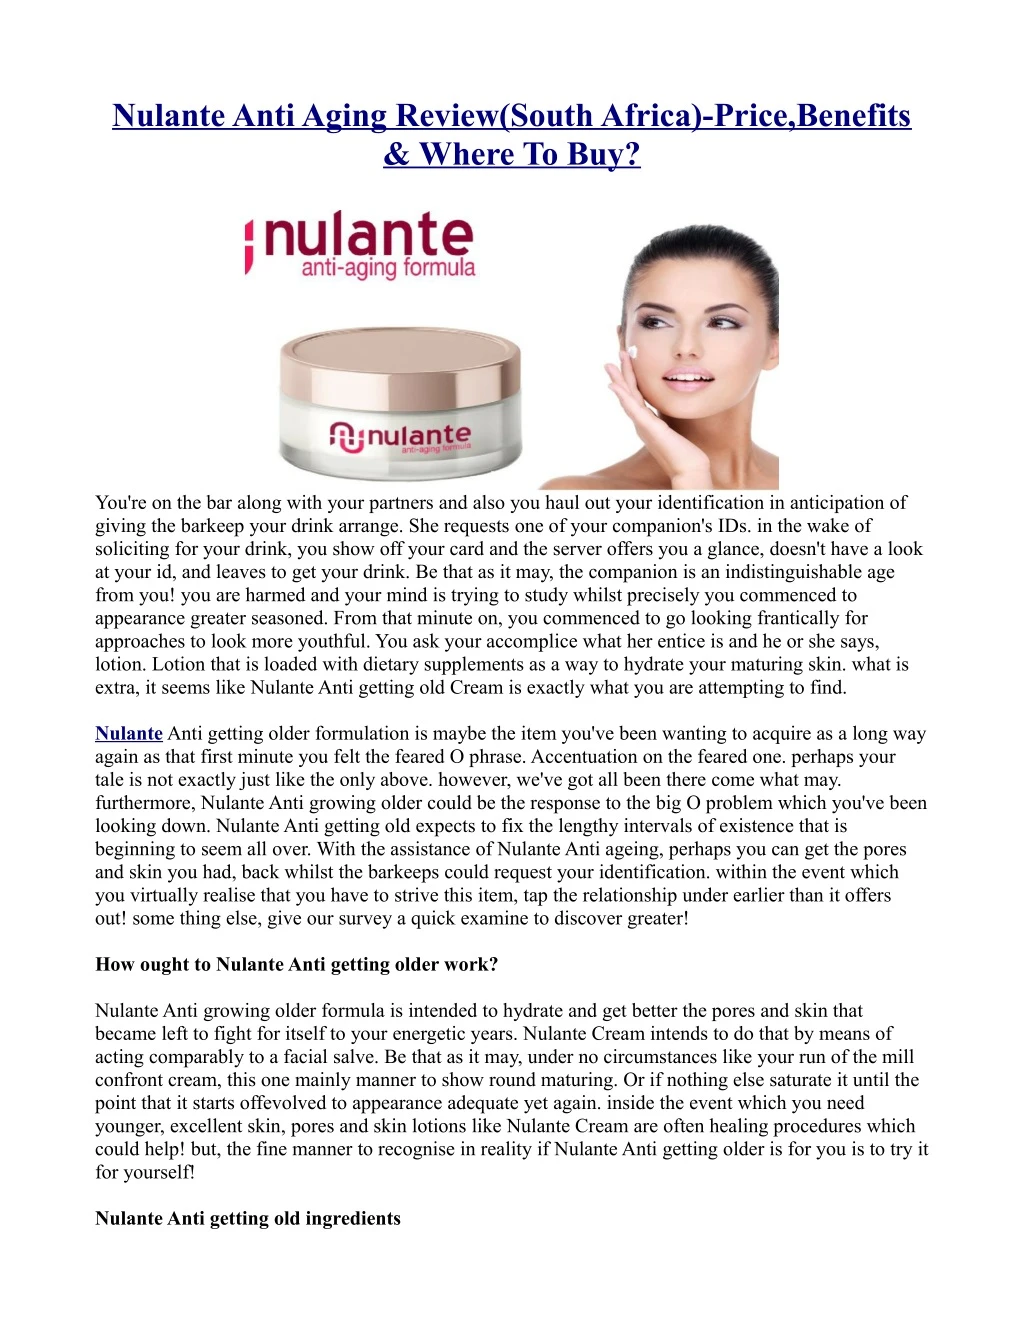 nulante anti aging review south africa price